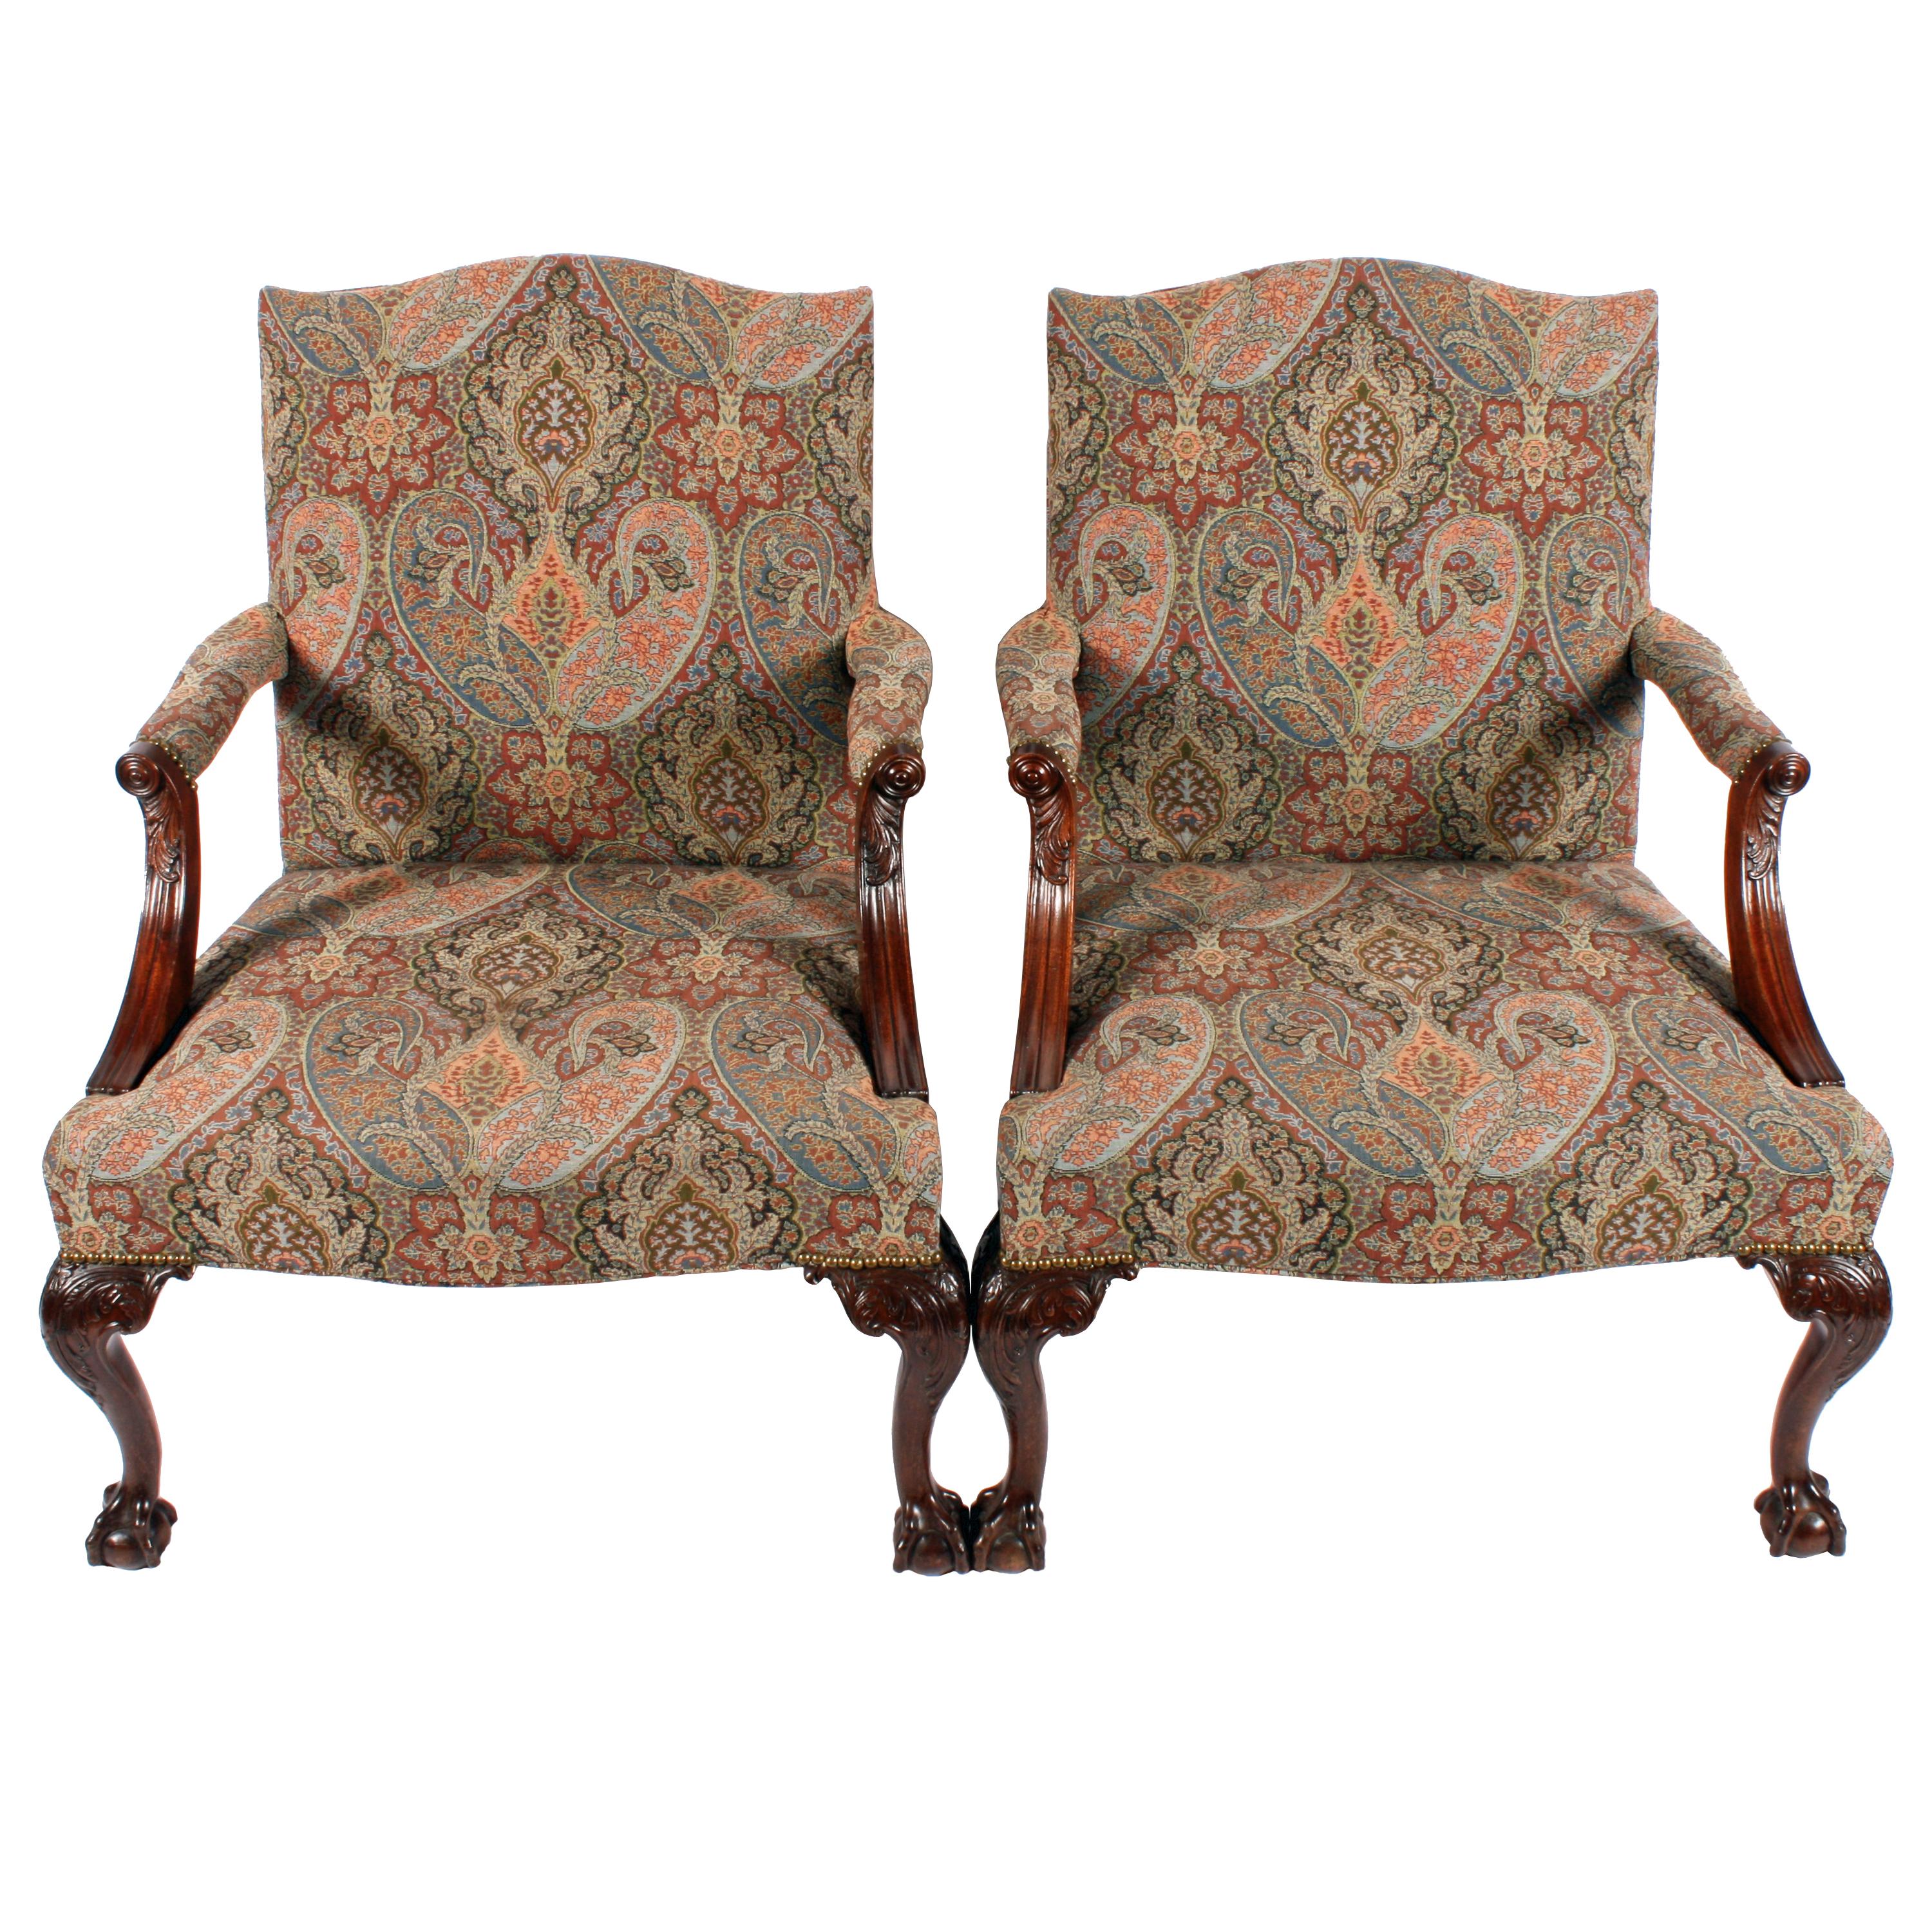 A pair of 18th century style mahogany Gainsborough arm chairs.

These Chippendale style chairs are large with cabriole front legs that have carved acanthus knees and carved claw and ball feet.

The back legs are cabriole shaped and have a pad